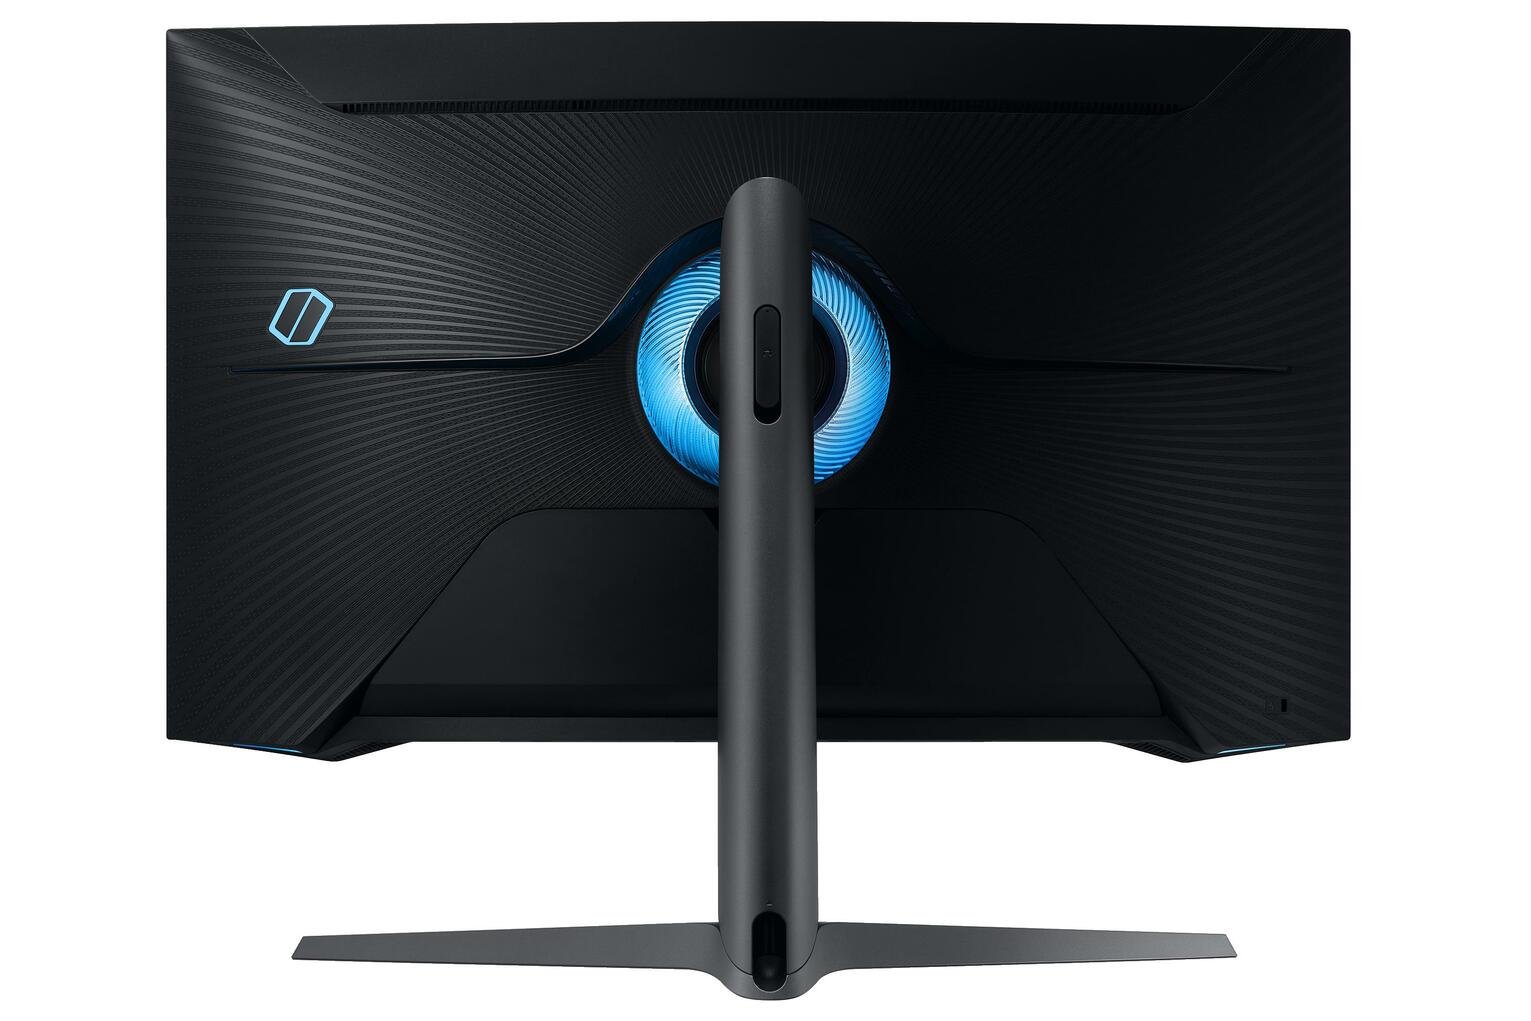 Samsung Odyssey 32in 240Hz QHD Gaming Monitor Review